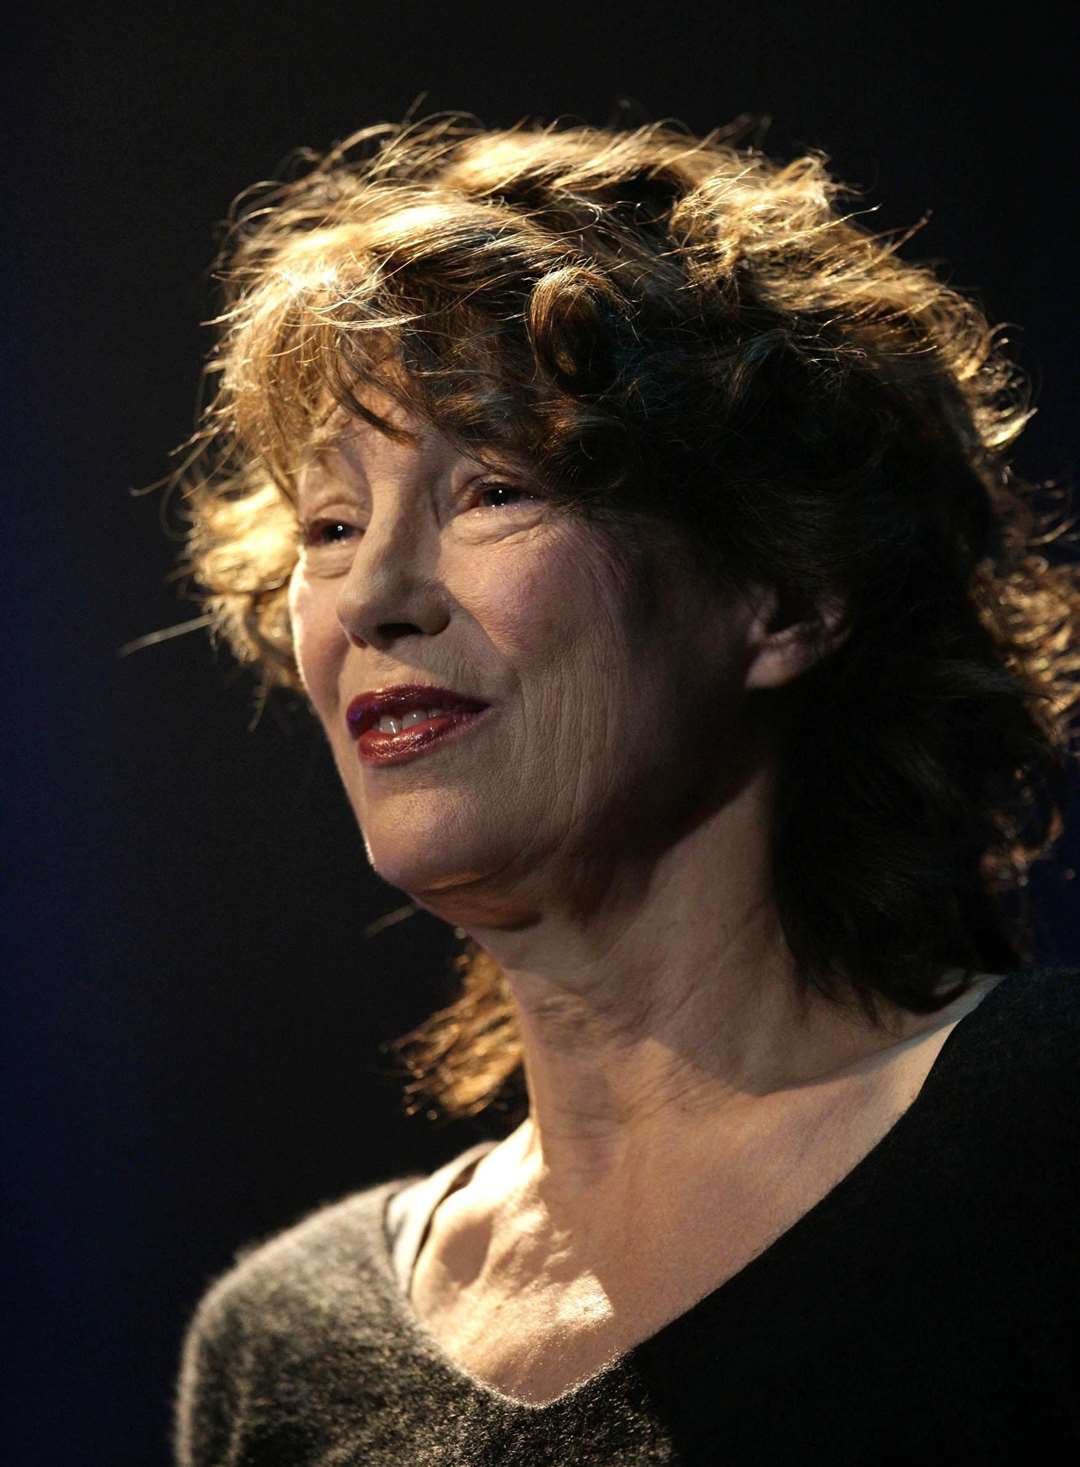 Jane Birkin in concert at The Roundhouse in Camden, north London, in 2008 (Yui Mok/PA)